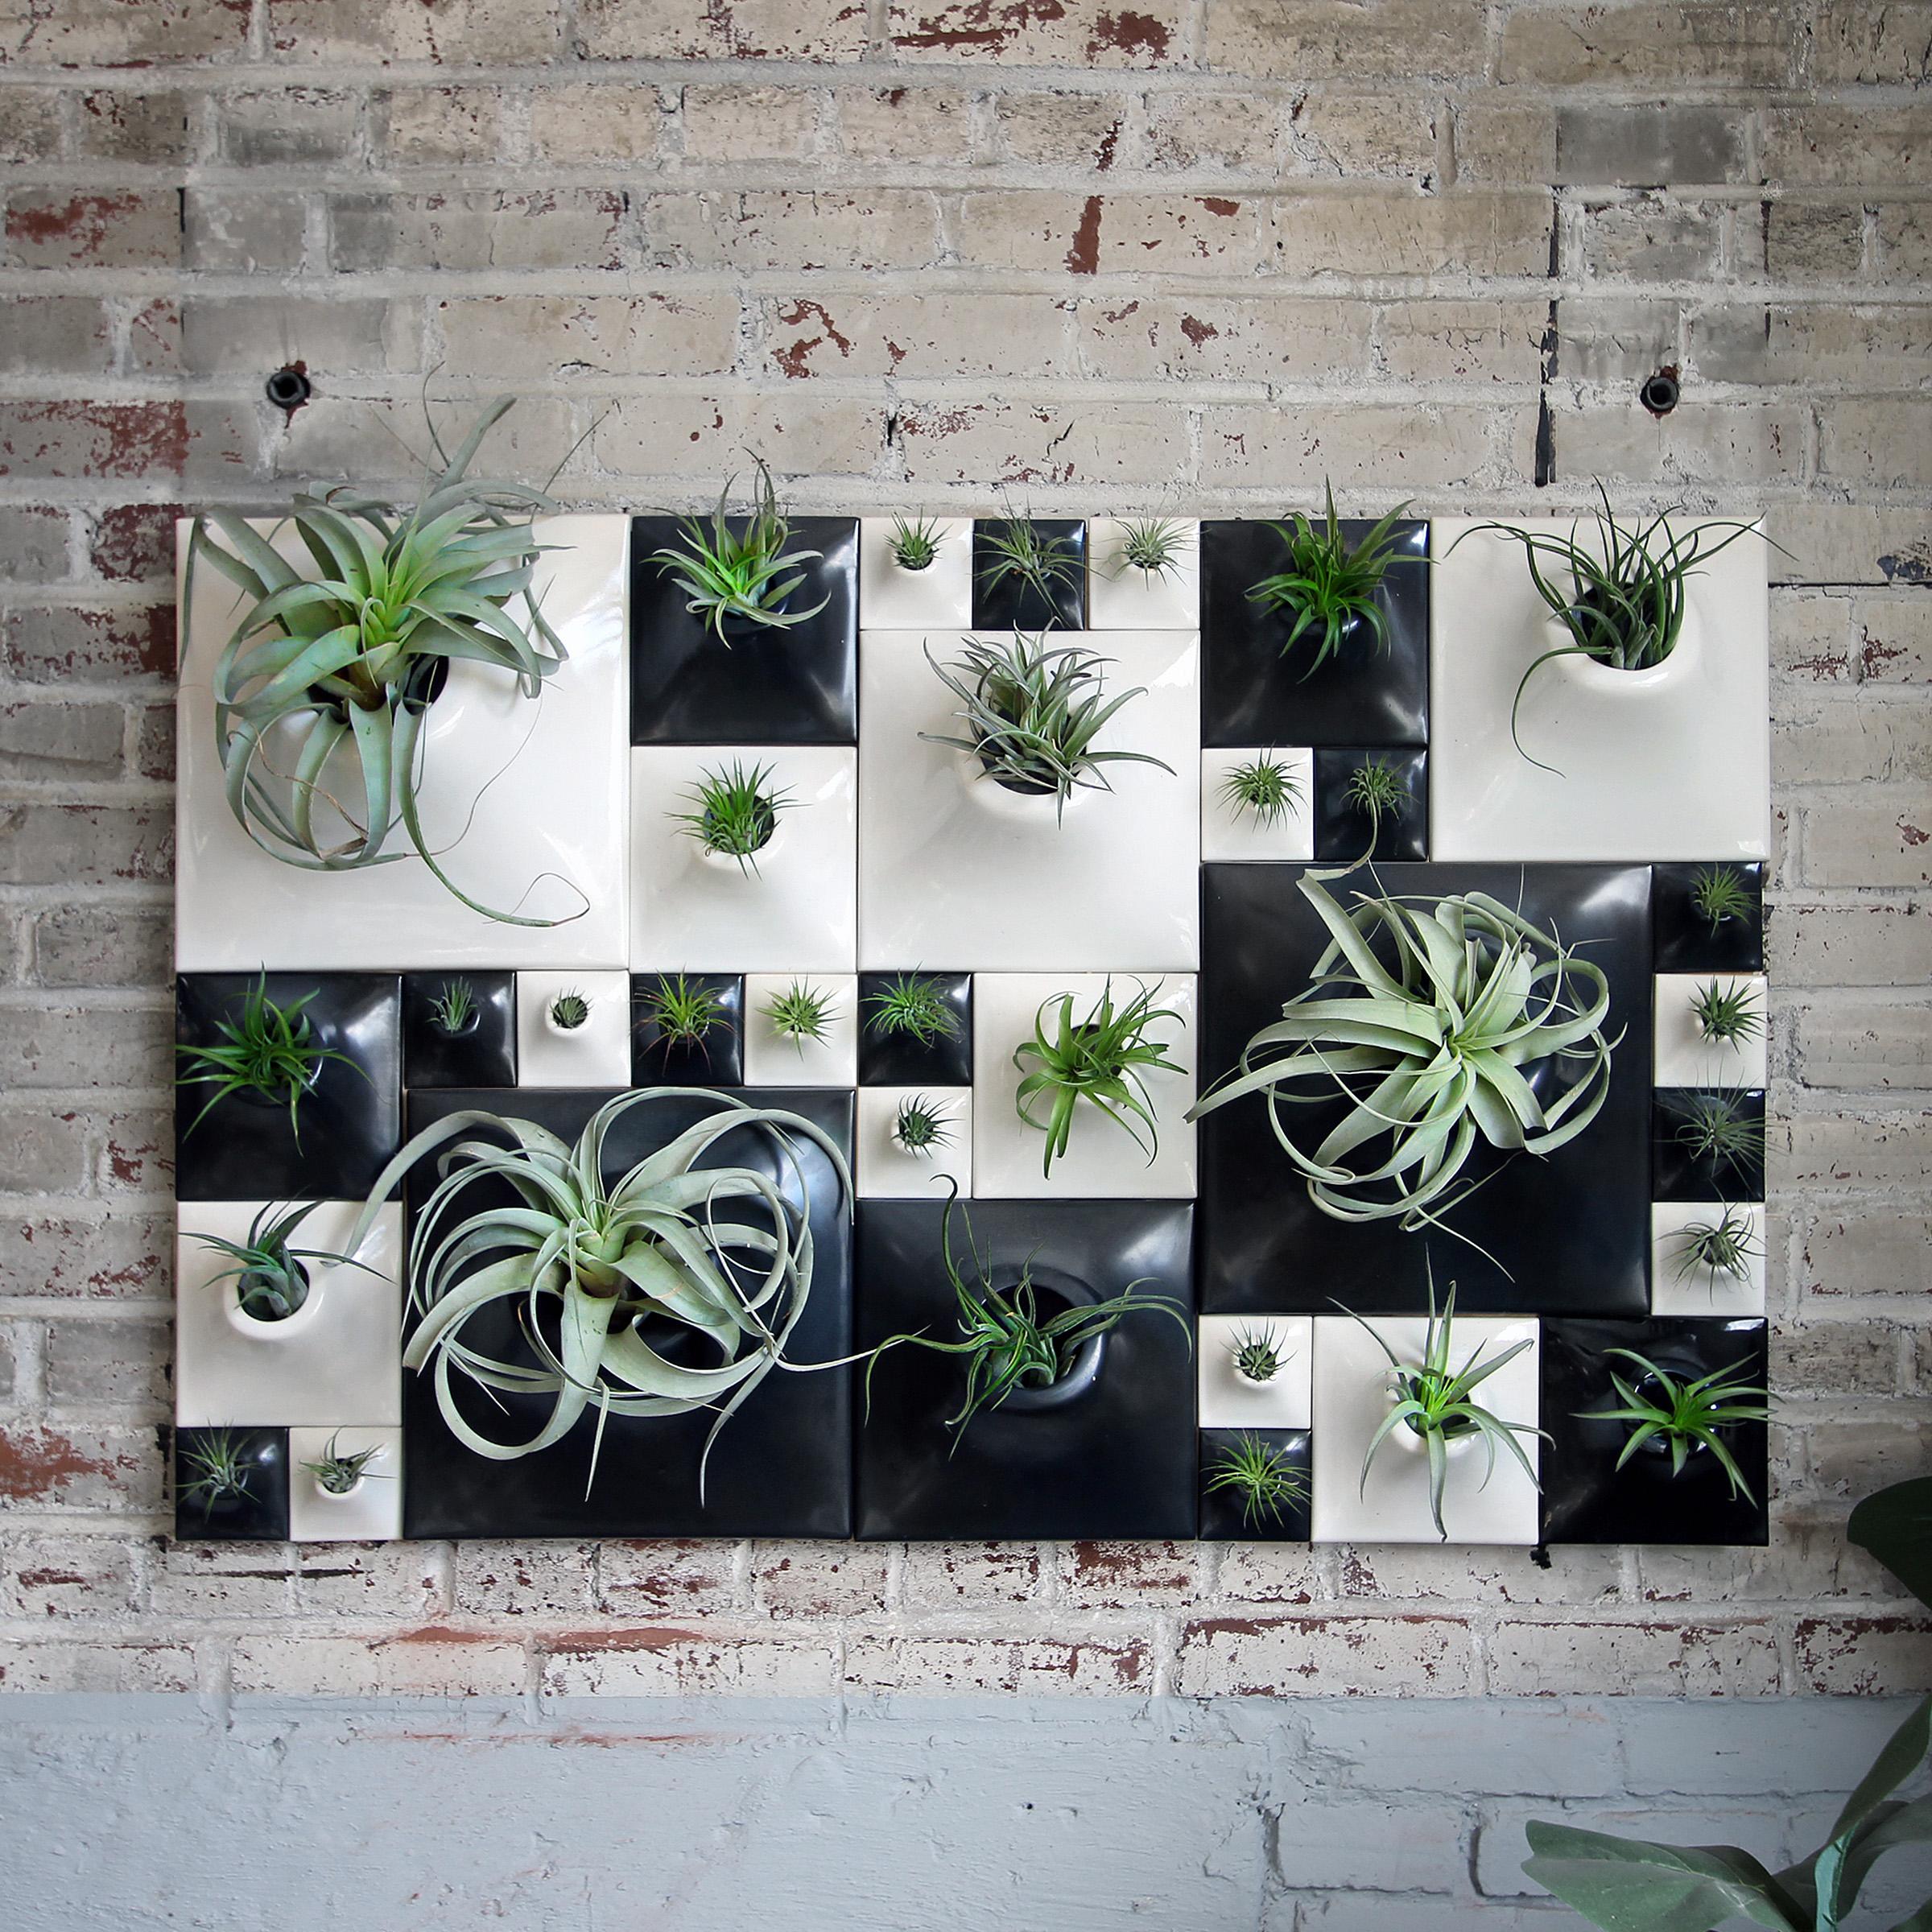 Glazed Modern Wall Sculpture, Wall Art Installation, Living Wall Decor, Price per Sq Ft For Sale